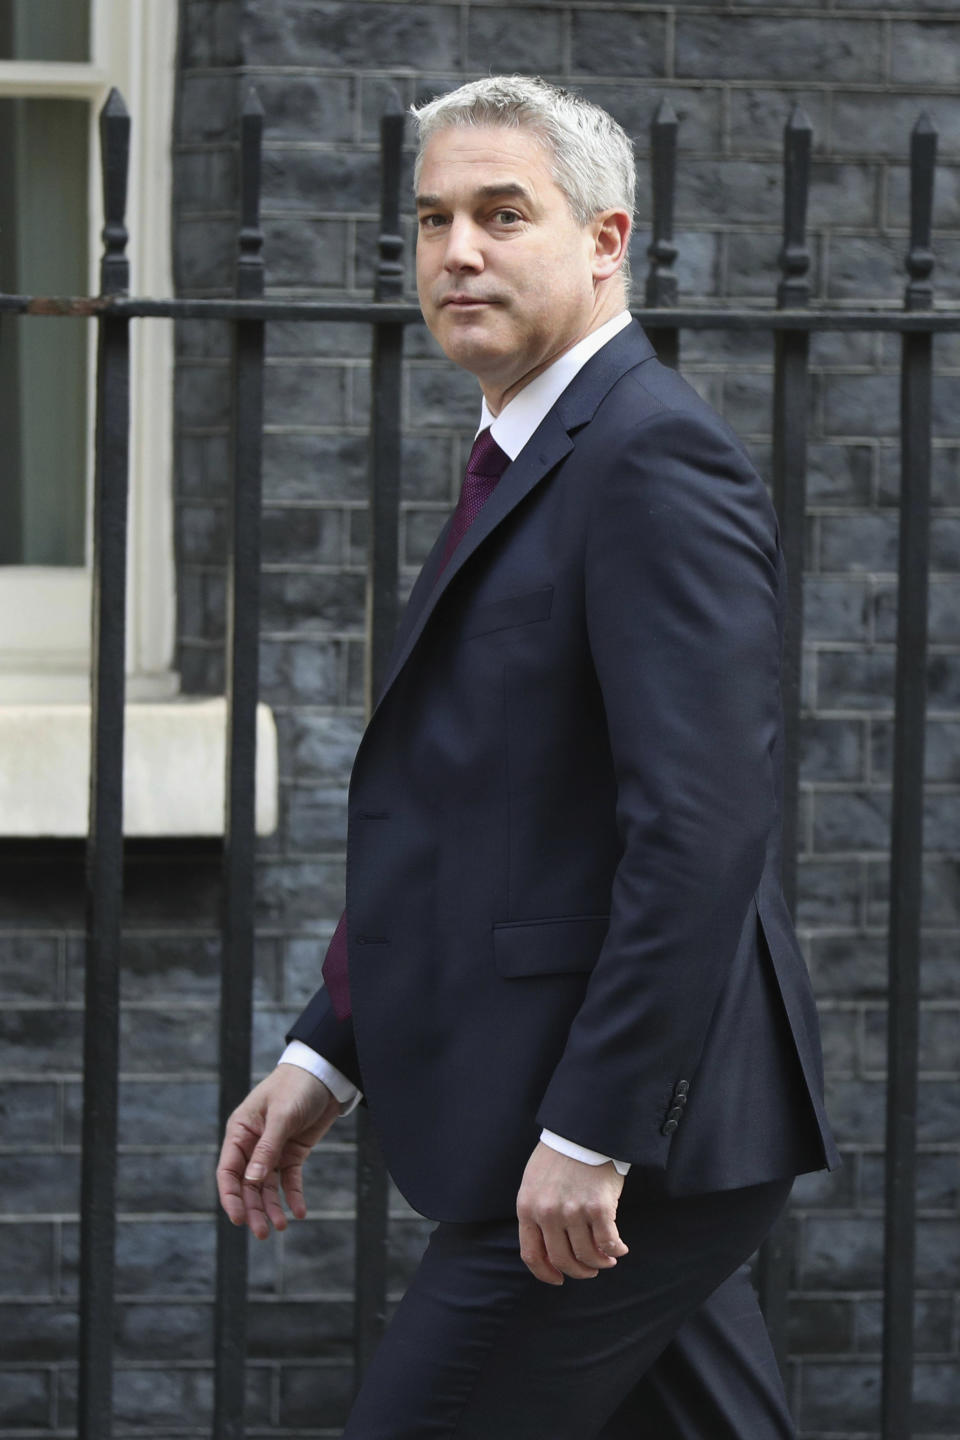 Britain's Brexit Secretary Stephen Barclay in Downing Street, ahead of the latest round of debates in the House of Commons concerning Brexit issues, Monday April 1, 2019. Britain’s Parliament gets another chance Monday to debate and vote on the Brexit divorce from the European Union, with the knowledge that if no agreement is reached by April 12, Britain will crash out of the EU without a plan for future relations. (Jonathan Brady/PA via AP)